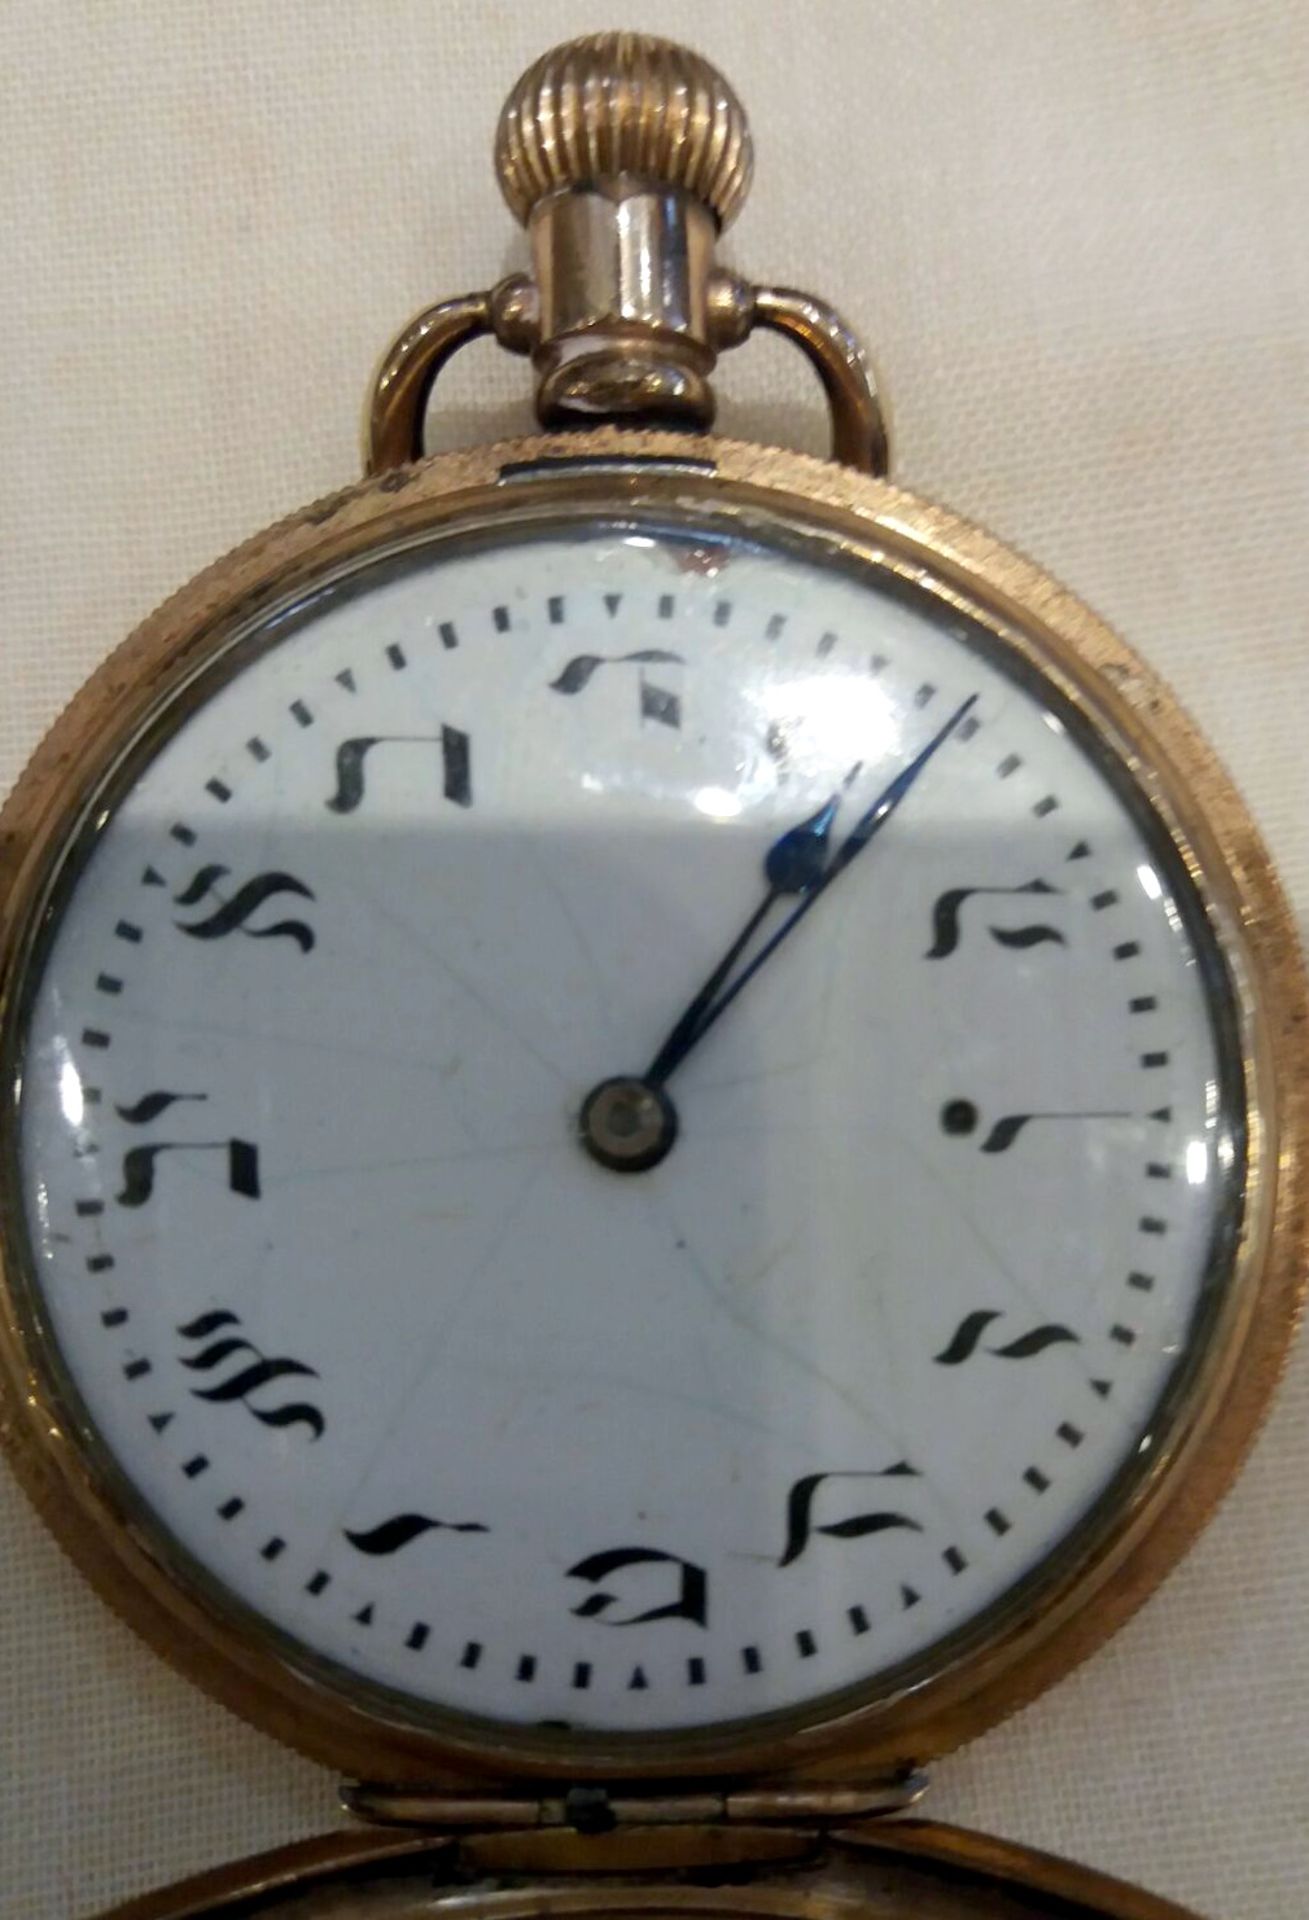 Unusual Valmor Gold Plated Pocket Watch With Hebrew Numerals